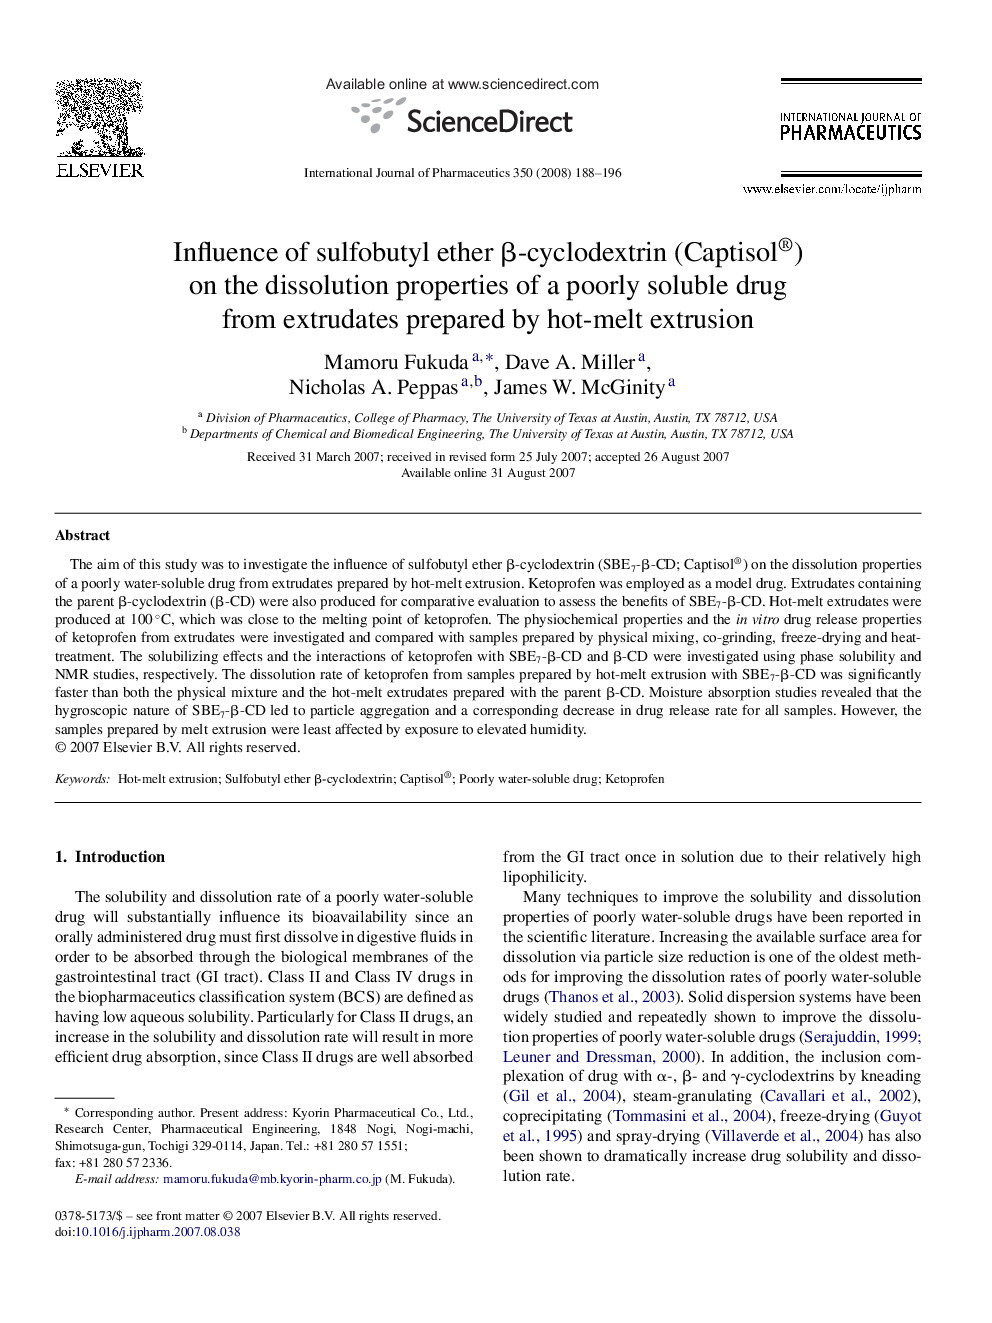 Influence of sulfobutyl ether β-cyclodextrin (Captisol®) on the dissolution properties of a poorly soluble drug from extrudates prepared by hot-melt extrusion